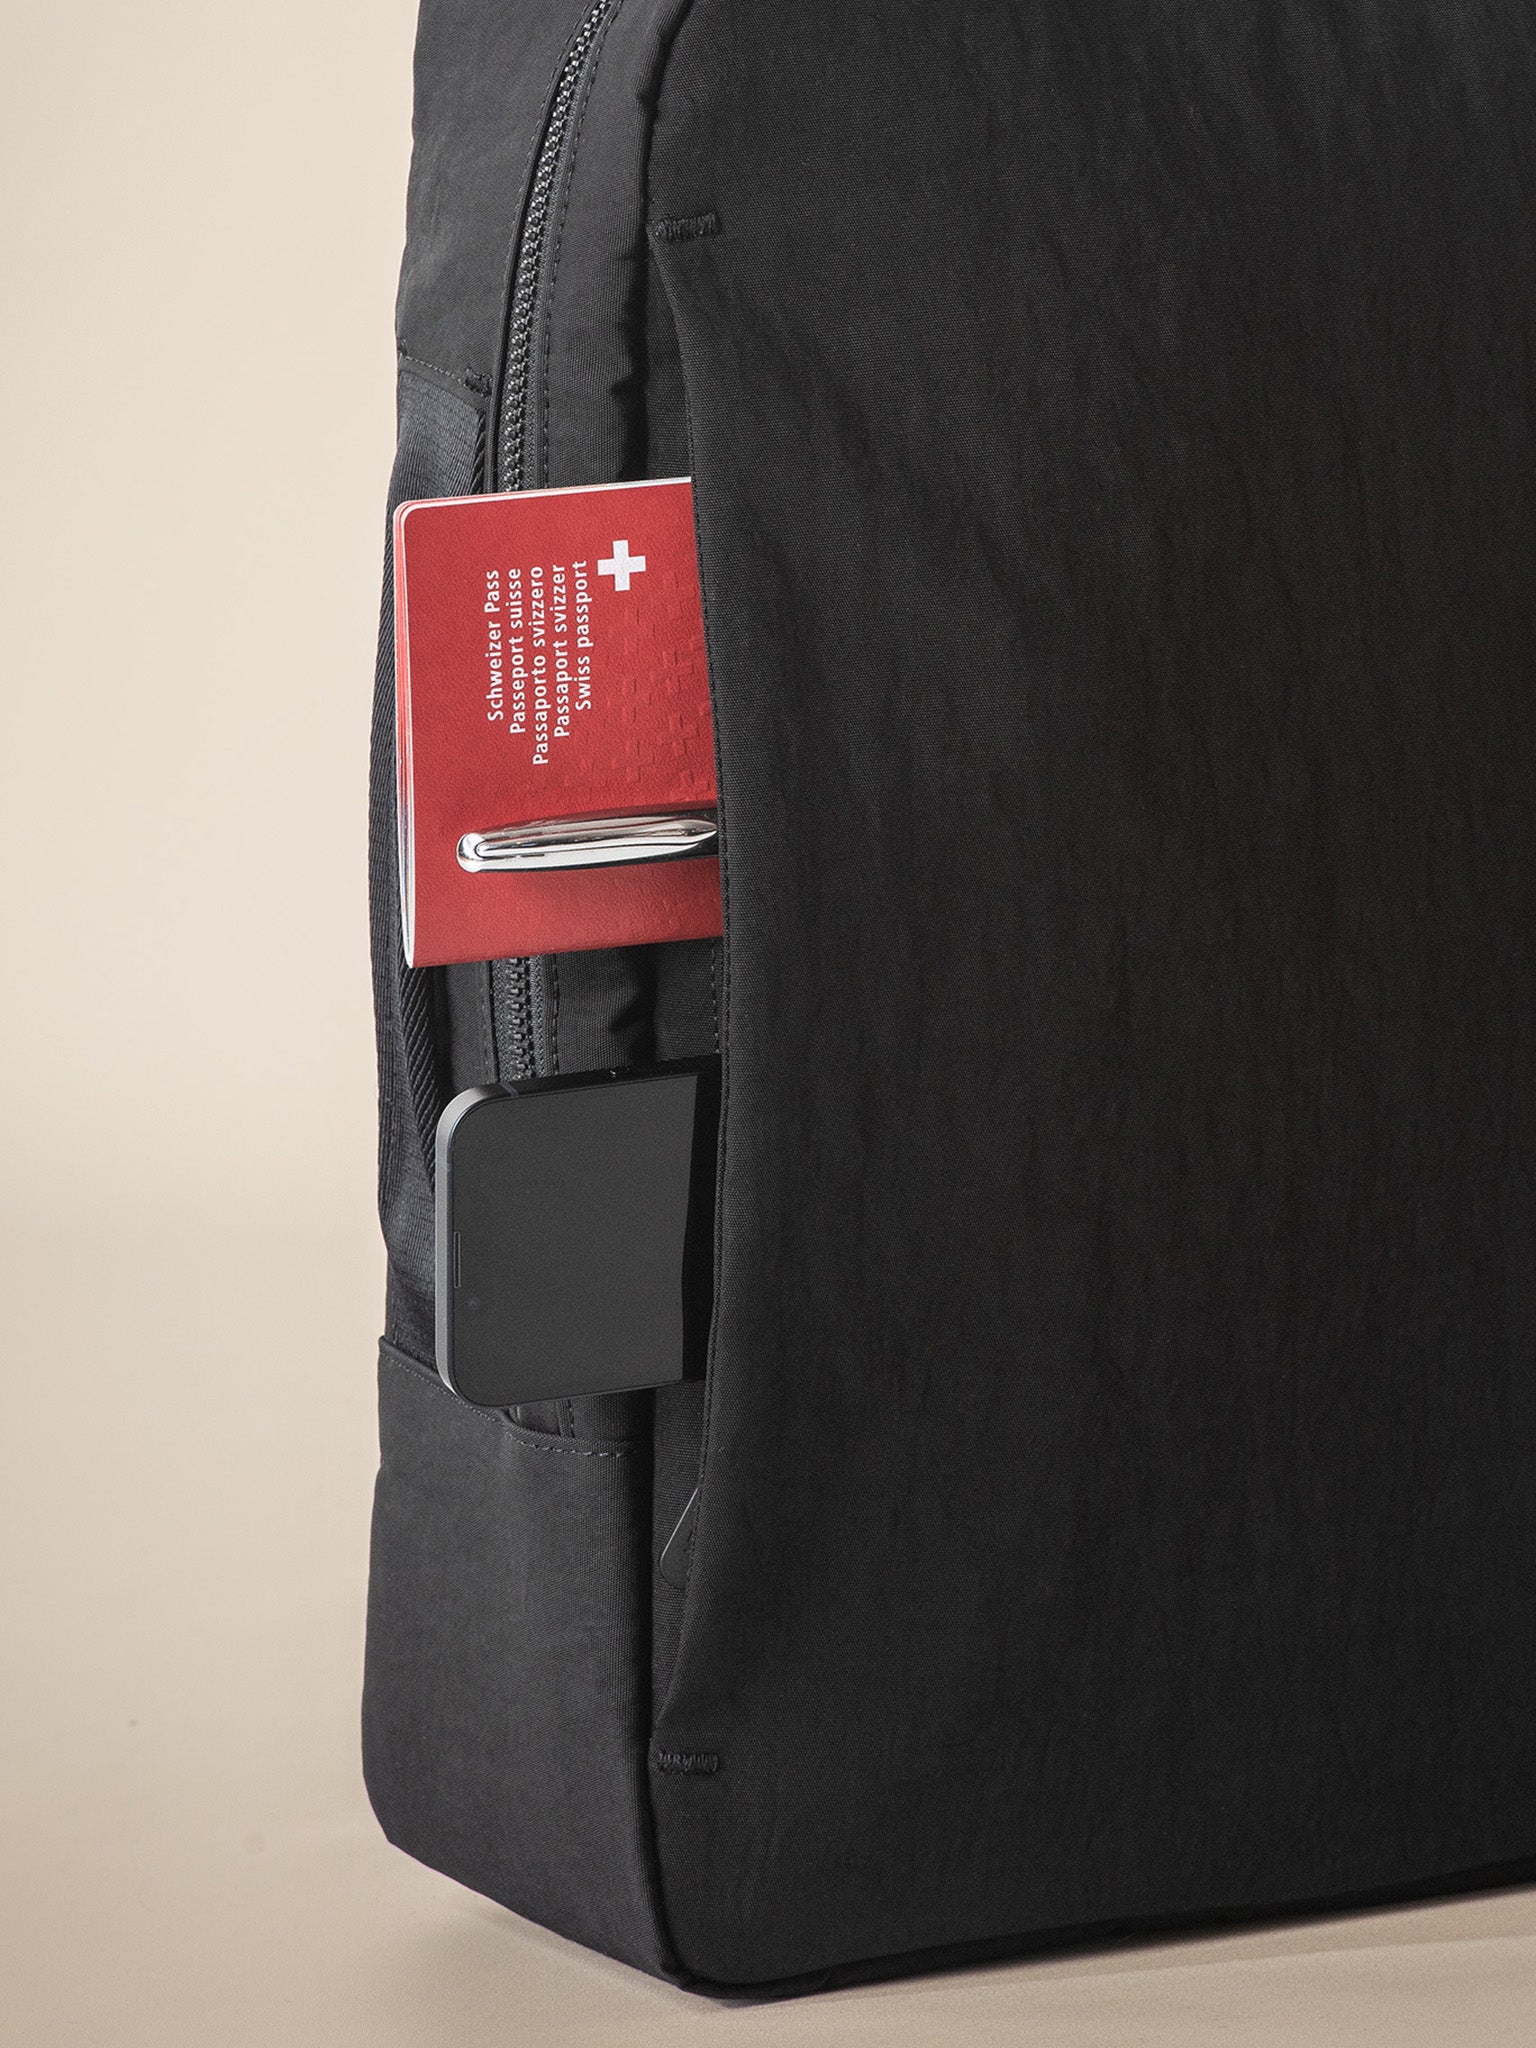 A fashionable men's backpack for work with a modern and minimalist design.